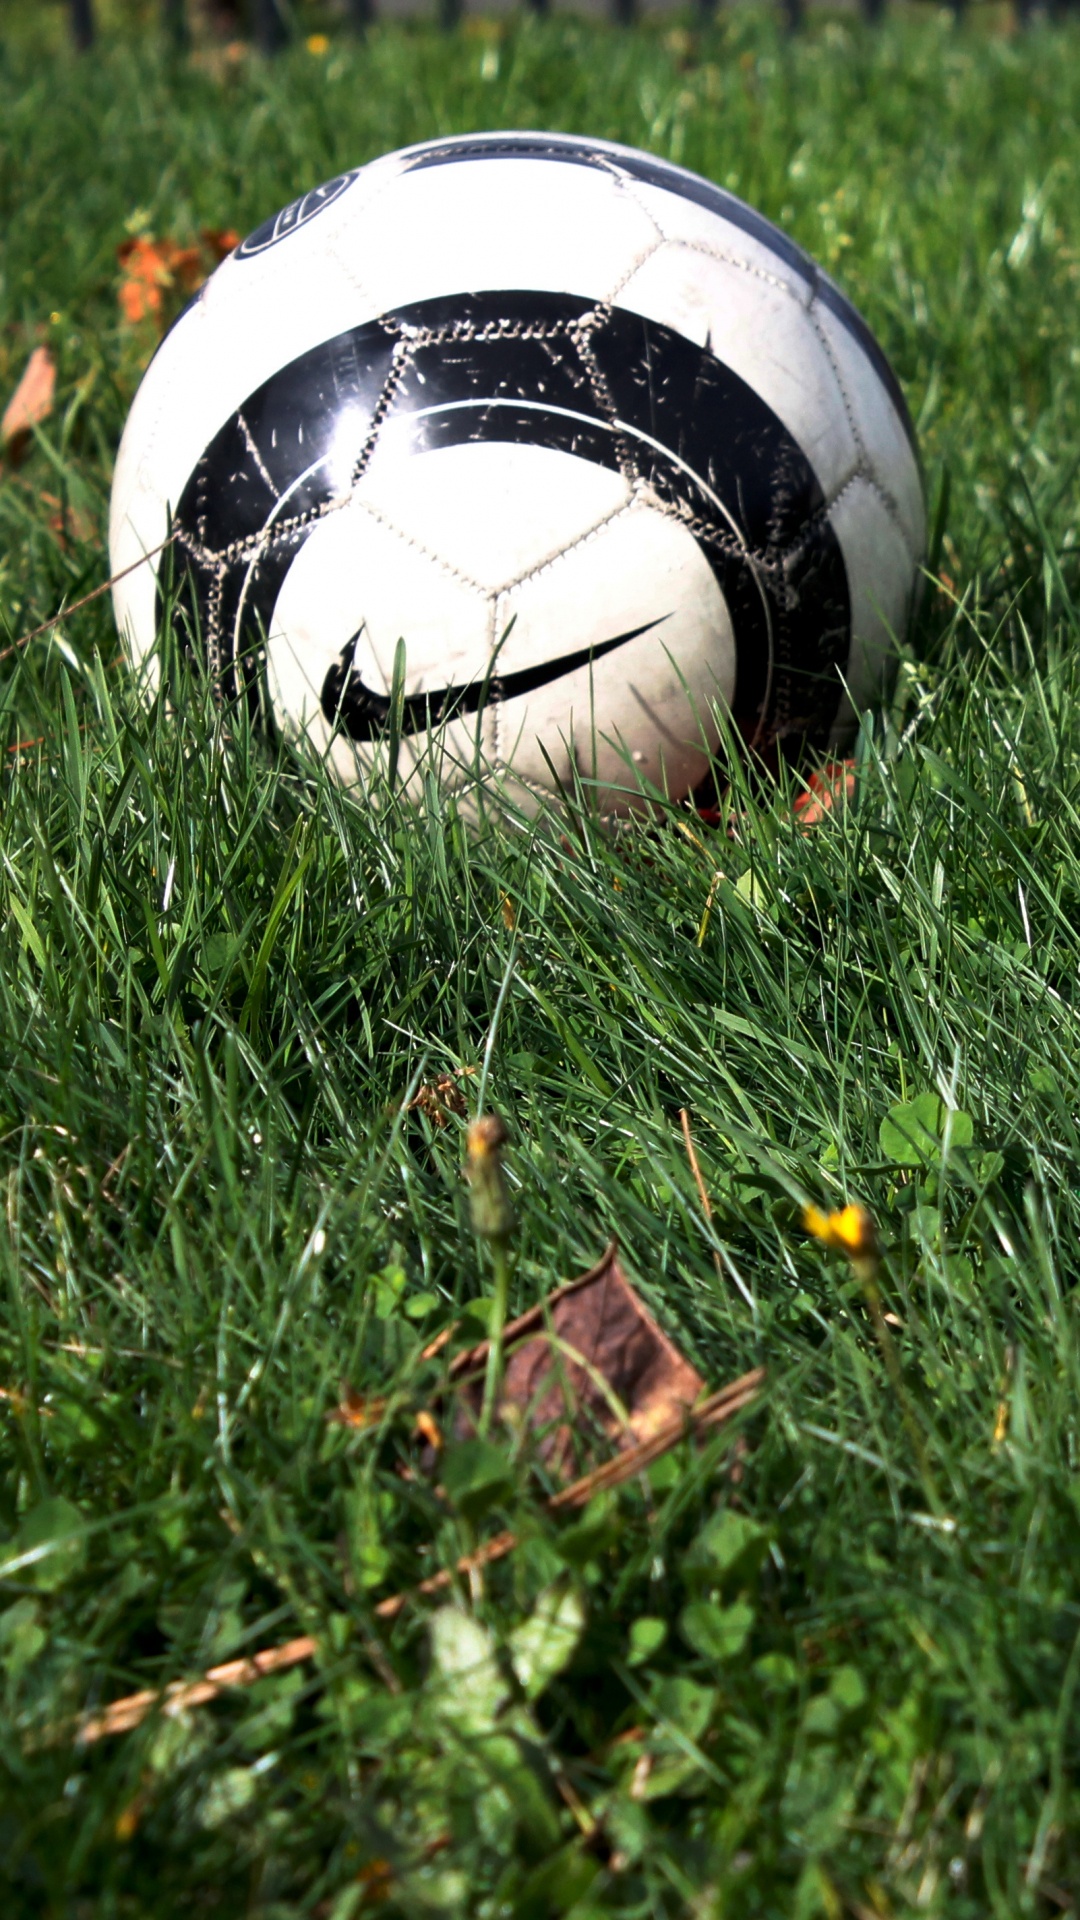 White and Black Soccer Ball on Green Grass Field. Wallpaper in 1080x1920 Resolution